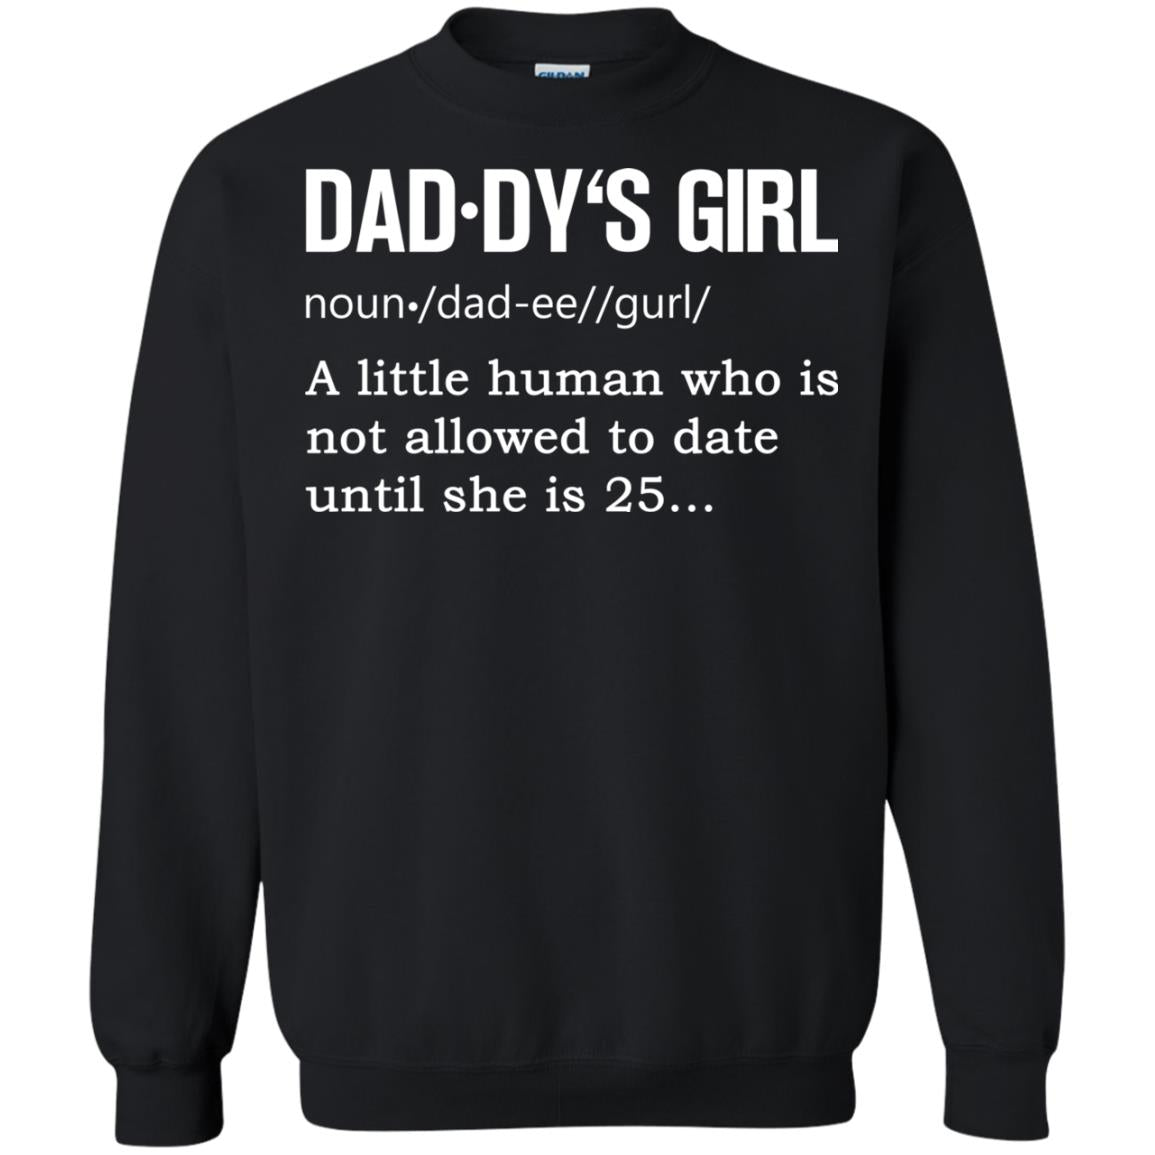 Daddy_s Girl A Little Human Who Is Not Allowed To Date Until She Is 25G180 Gildan Crewneck Pullover Sweatshirt 8 oz.